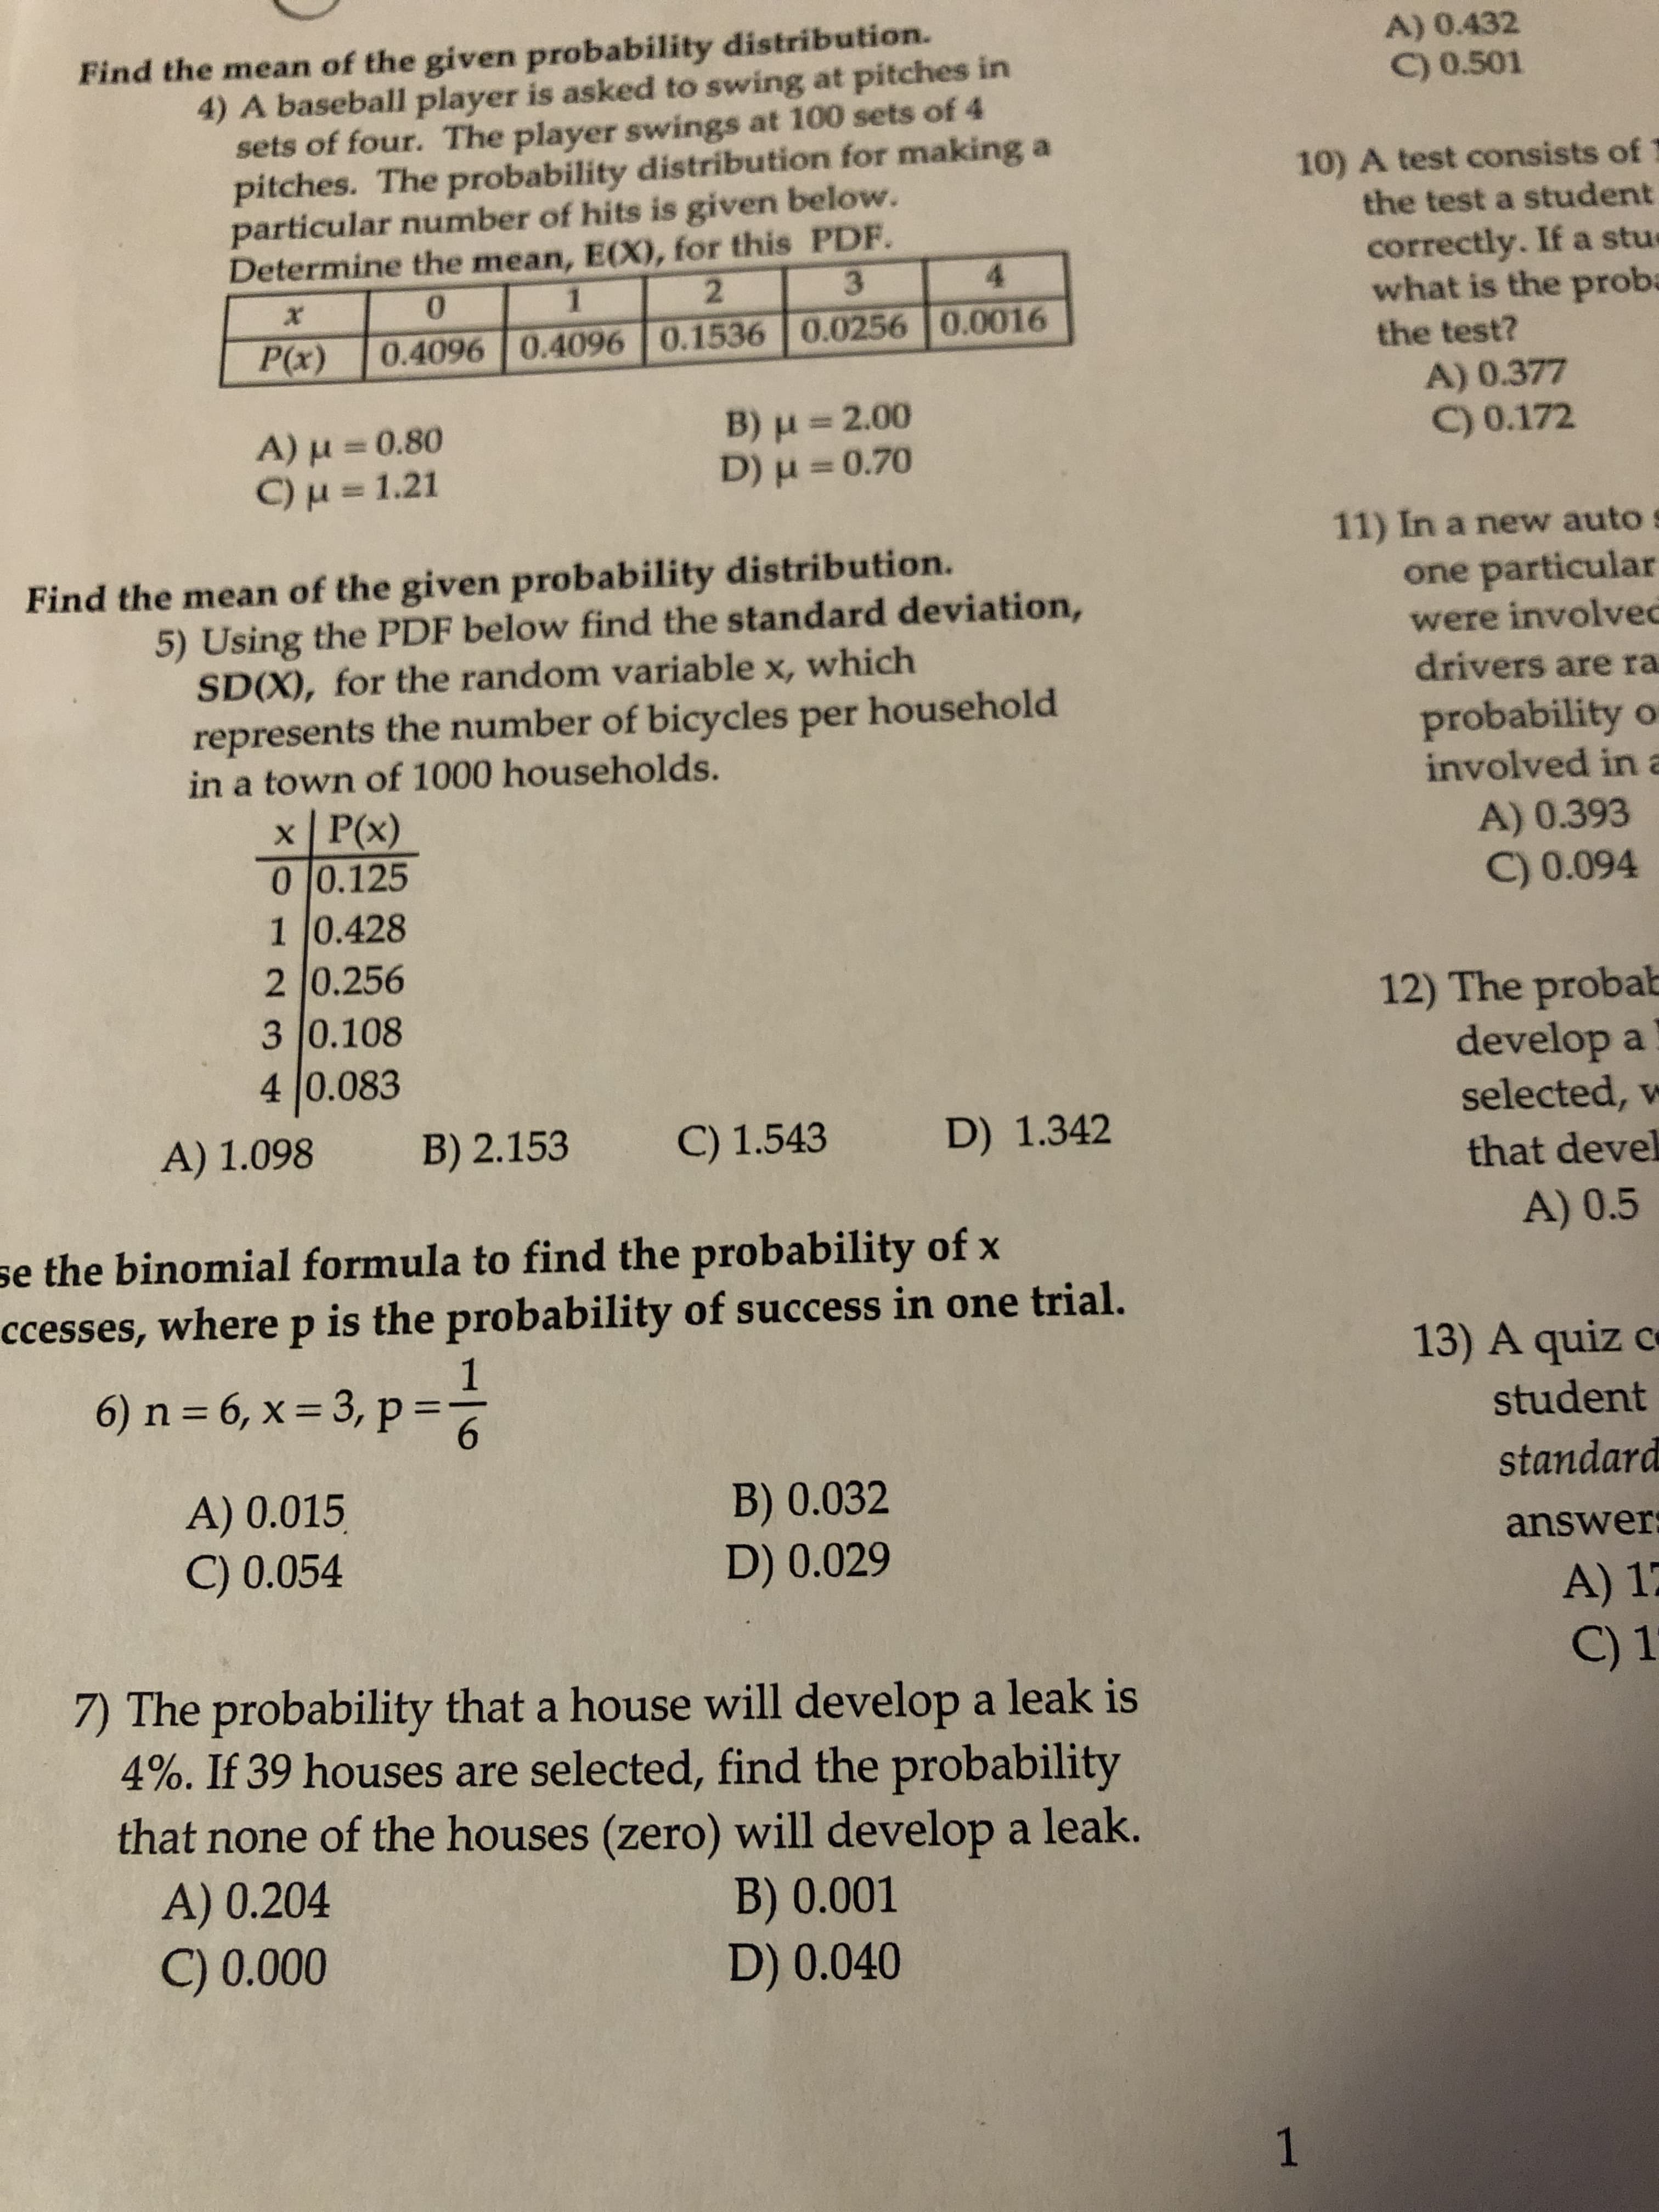 Find the mean of the given probability distribution.
4) A baseball player is asked to swing at pitches in
sets of four. The player swings at 100 sets of 4
pitches. The probability distribution for making a
particular number of hits is given below.
Determine the mean, E(X), for this PDF.
A) 0.432
C) 0.501
10) A test consists of
the test a student
correctly. If a stue
what is the proba
0.
2.
3.
4.
P(x)
0.4096 0.40960.1536 0.0256 0.0016
the test?
A) 0.377
B) u =2.00
A)u3D0.80
C)u = 1.21
%3D
C) 0.172
D) H =
30.70
11) In a new auto s
Find the mean of the given probability distribution.
one particular
5) Using the PDF below find the standard deviation,
SD(X), for the random variable x, which
represents the number of bicycles per household
in a town of 1000 households.
were involved
drivers are ra
probability o
involved in a
x P(x)
0 0.125
10.428
2 0.256
3 0.108
4 0.083
A) 0.393
C) 0.094
12) The probab
develop a
selected, w
A) 1.098
B) 2.153
C) 1.543
D) 1.342
that devel
A) 0.5
se the binomial formula to find the probability of x
ccesses, where p is the probability of success in one trial.
1
6) n = 6, x = 3, p:
13) A quiz c
6.
student
standard
A) 0.015
C) 0.054
B) 0.032
D) 0.029
answer:
A) 17
C) 1
7) The probability that a house will develop a leak is
4%. If 39 houses are selected, find the probability
that none of the houses (zero) will develop a leak.
A) 0.204
C) 0.000
B) 0.001
D) 0.040
1
